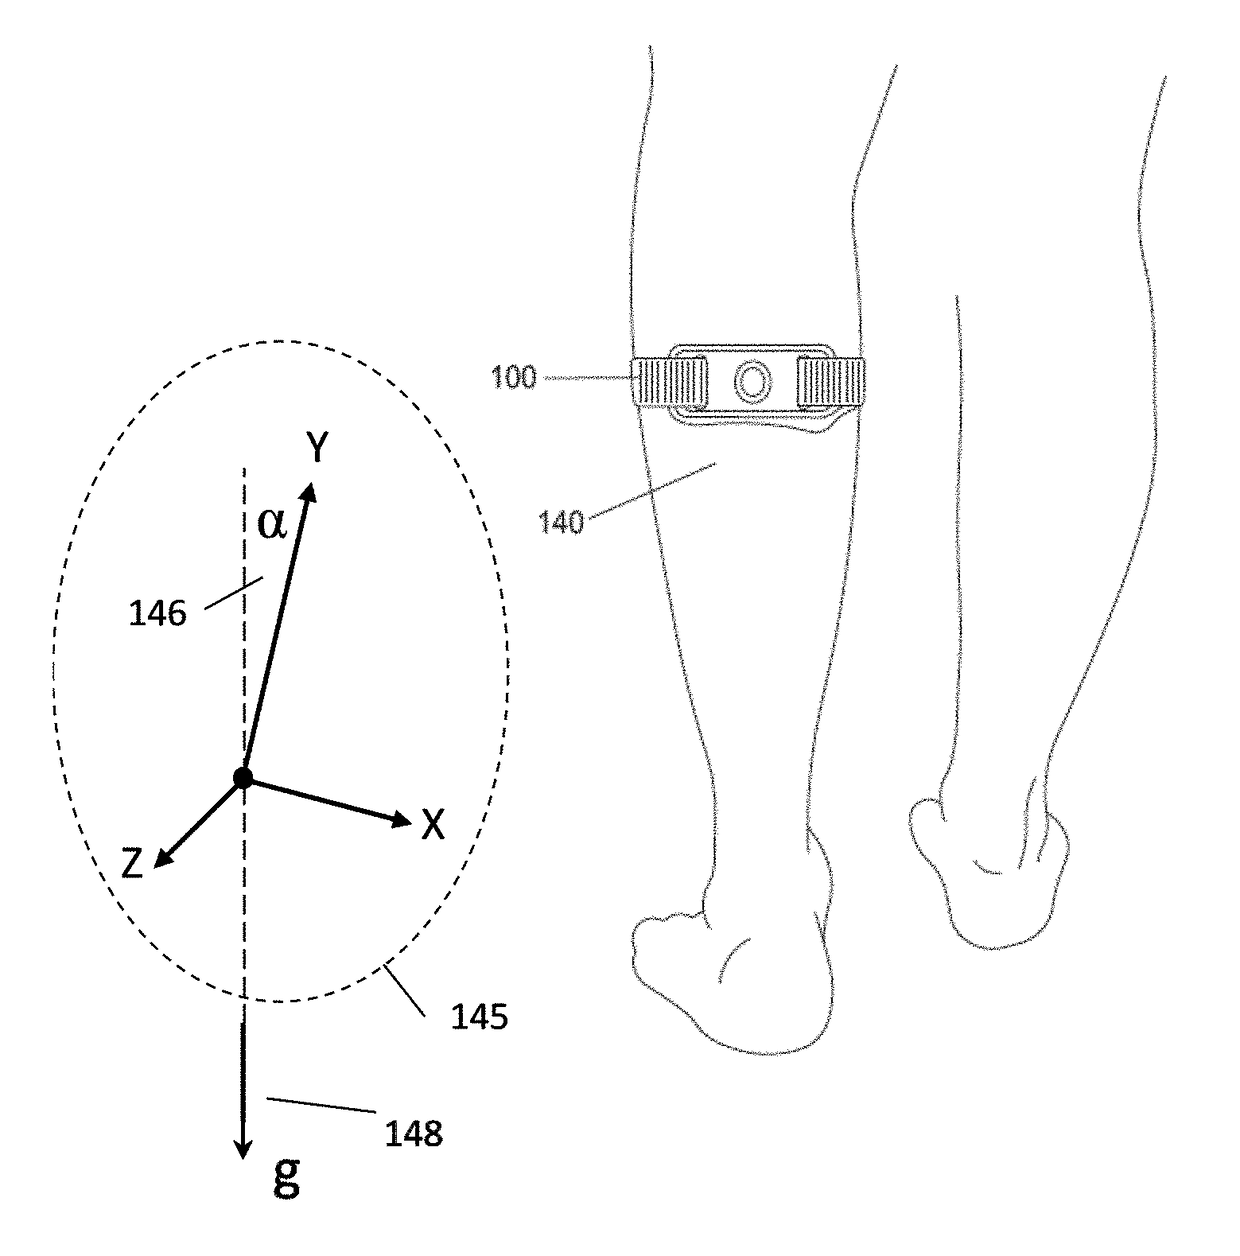 Apparatus and method for activity monitoring, gait analysis, and balance assessment for users of a transcutaneous electrical nerve stimulation (TENS) device